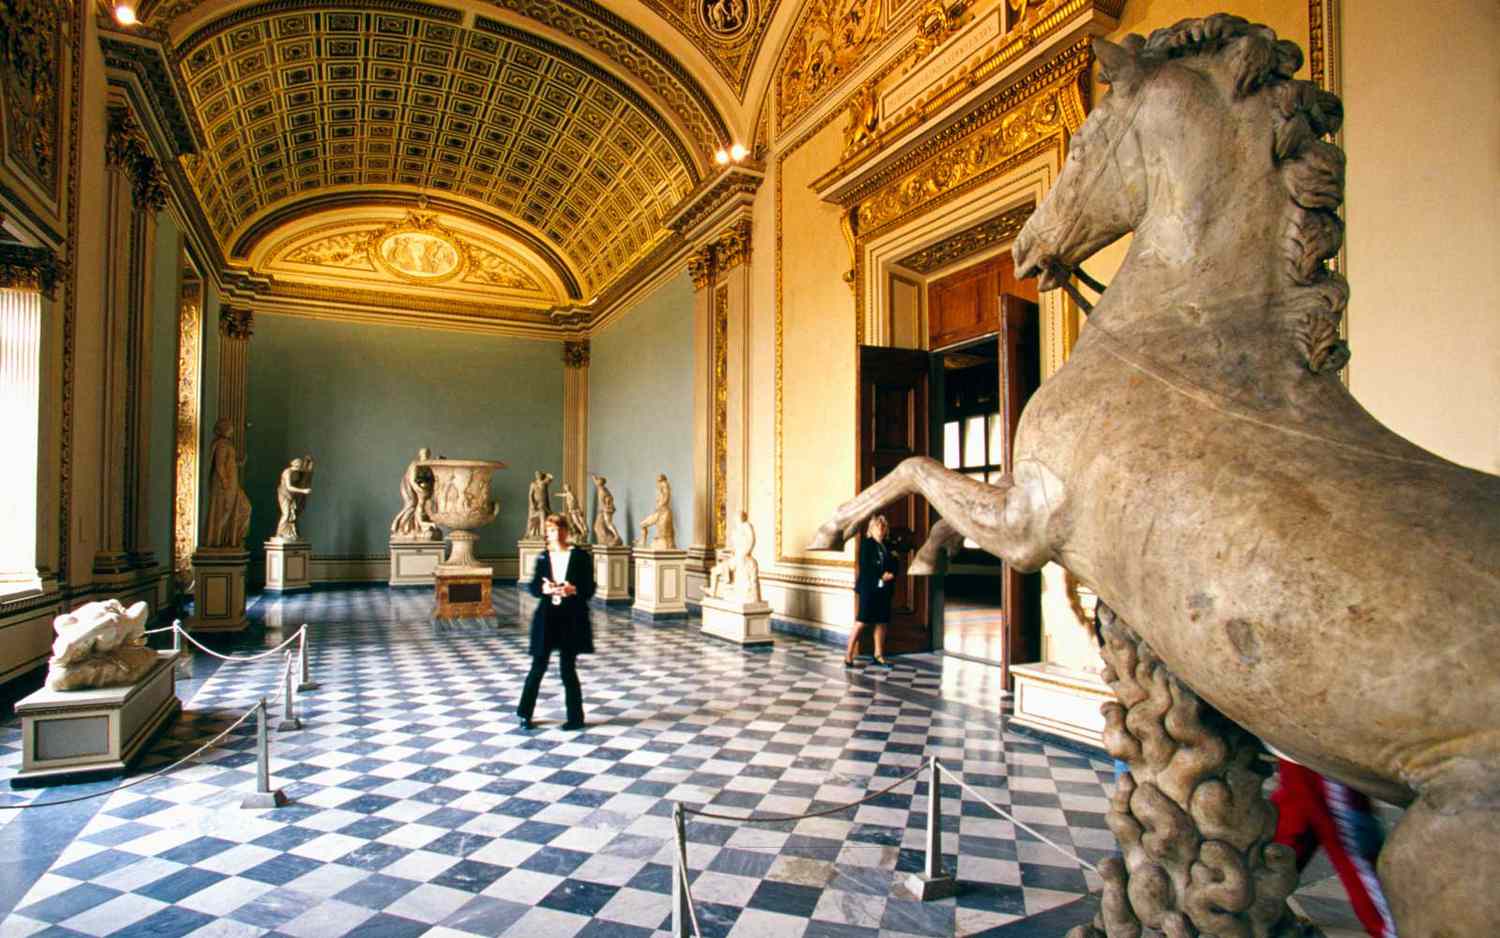 Stuck at Home? These 12 Famous Museums Offer Virtual Tours You Can Take on Your Couch